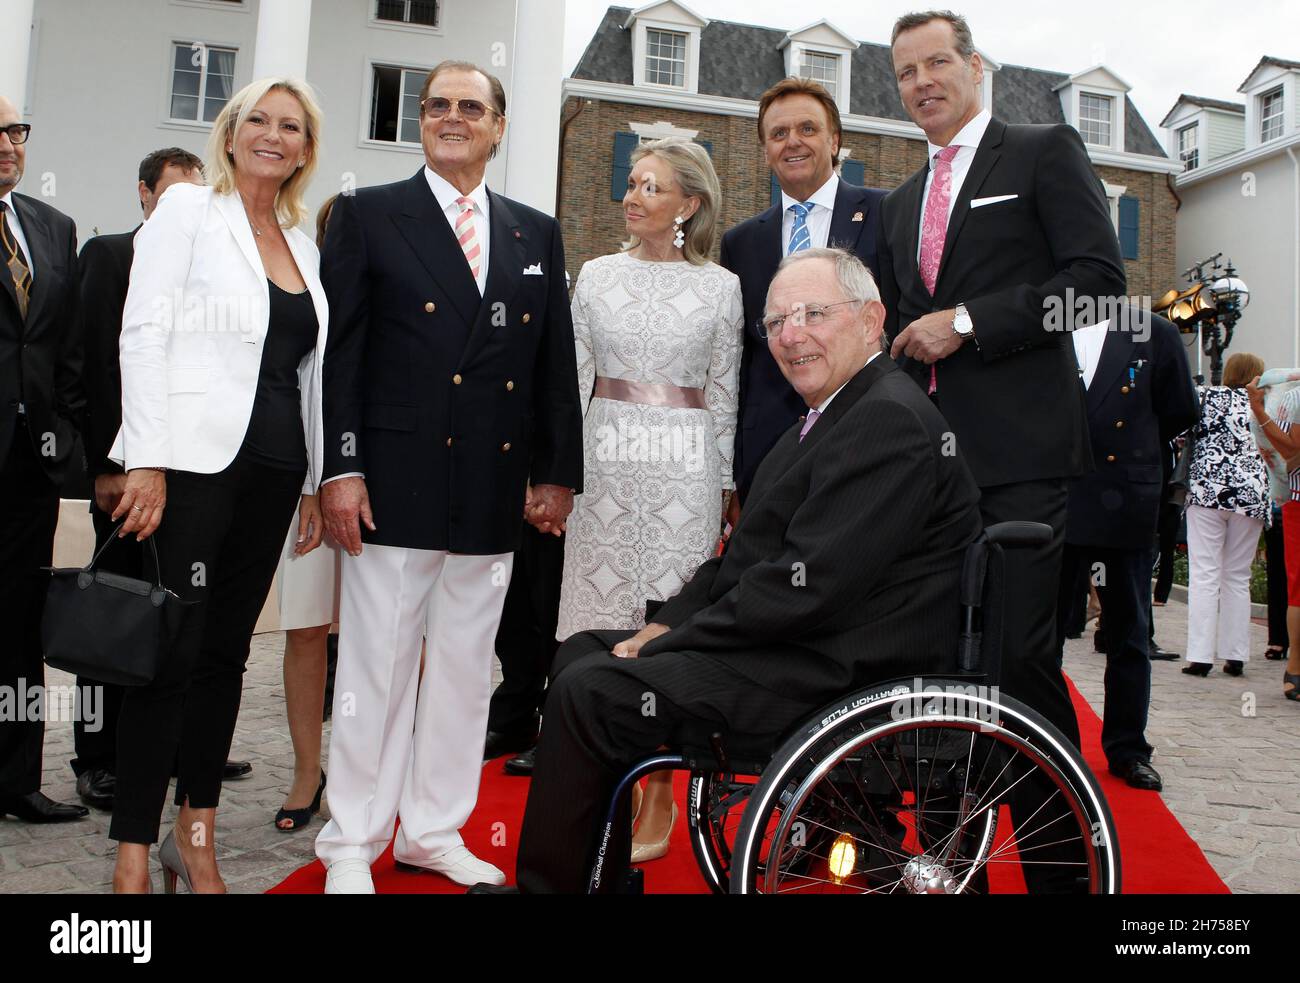 Rust, Deutschland. 12th July, 2012. Rust, Germany - July 12, 2012: Hotel Bell Rock Opening at Europa-Park in Rust with german TV Host Sabine Christiansen, Bristish Actor Sir Roger Moore, wife Kristina Tholstrup, Europa-Park CEO Roland Mack, german Boxer Henry Maske and german Finance Minis Credit: dpa/Alamy Live News Stock Photo